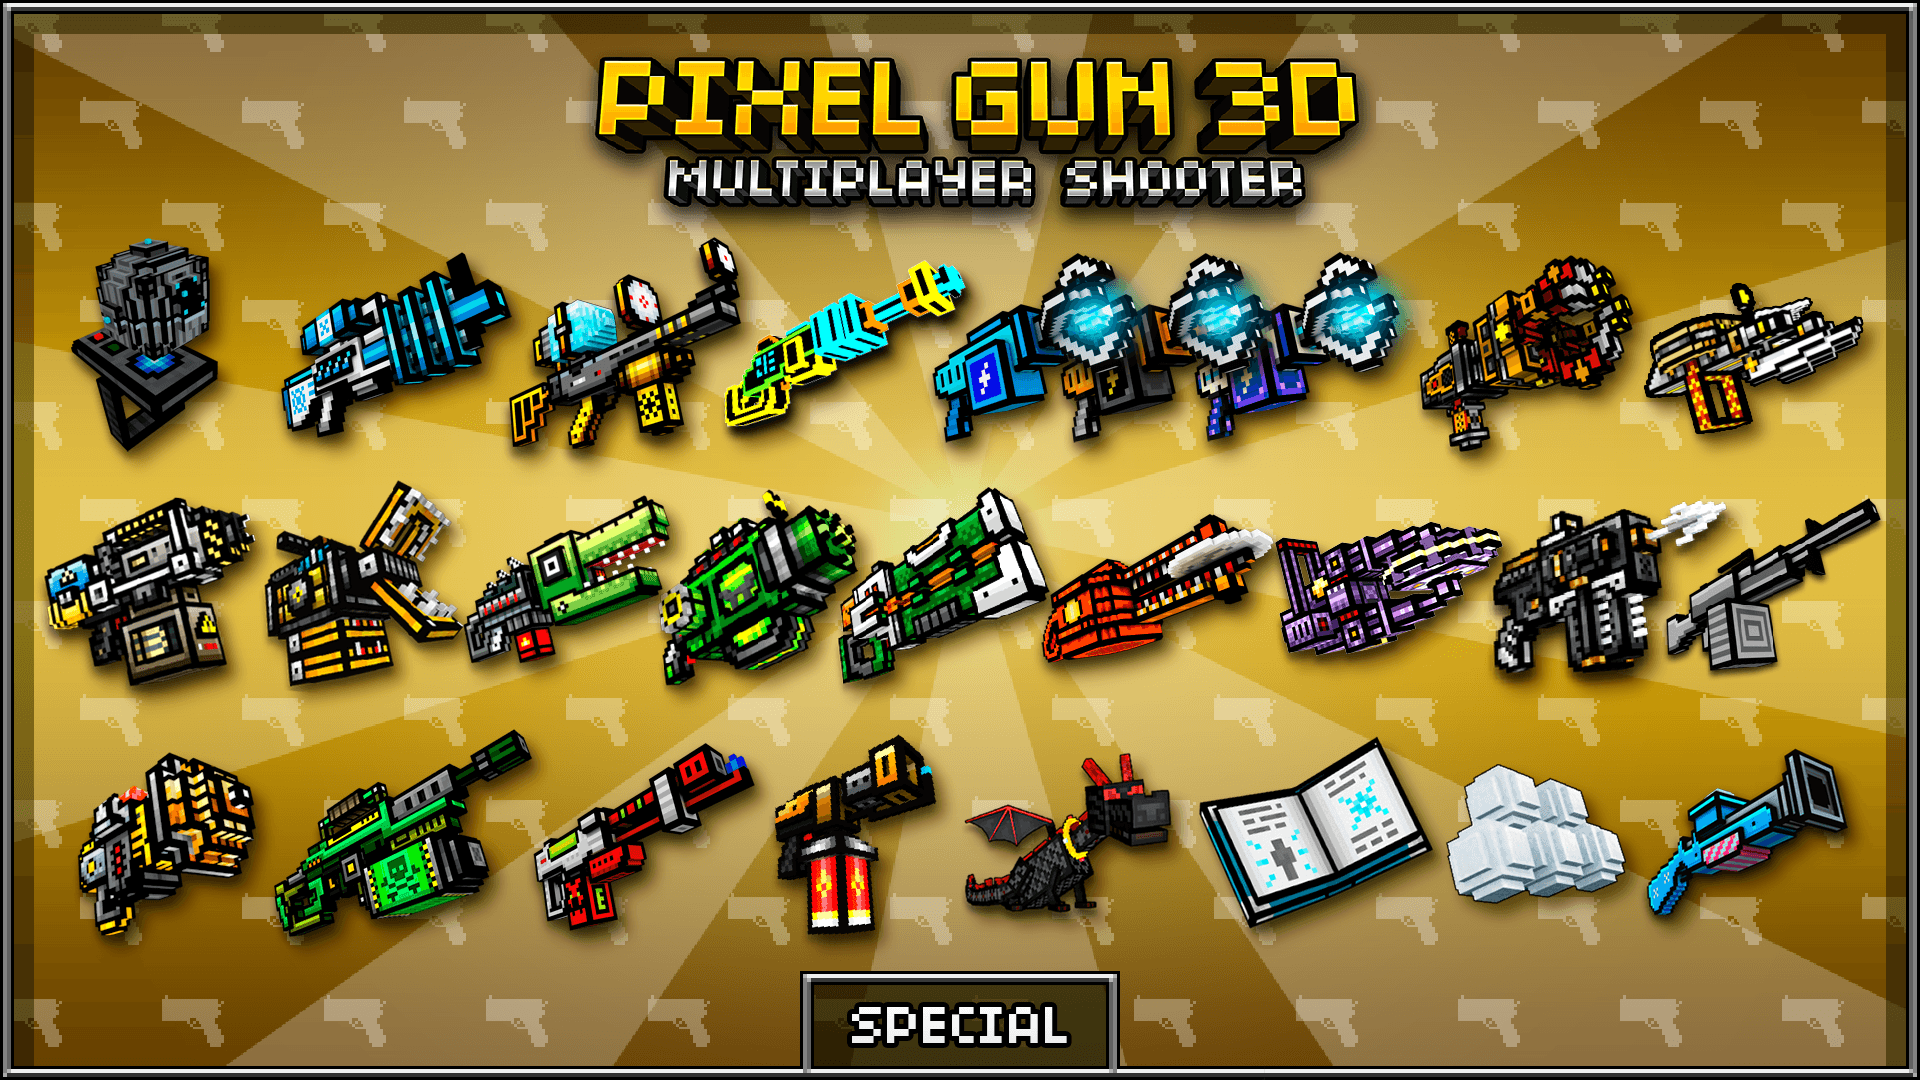 Pixel Gun 3D weapon for a special case! What